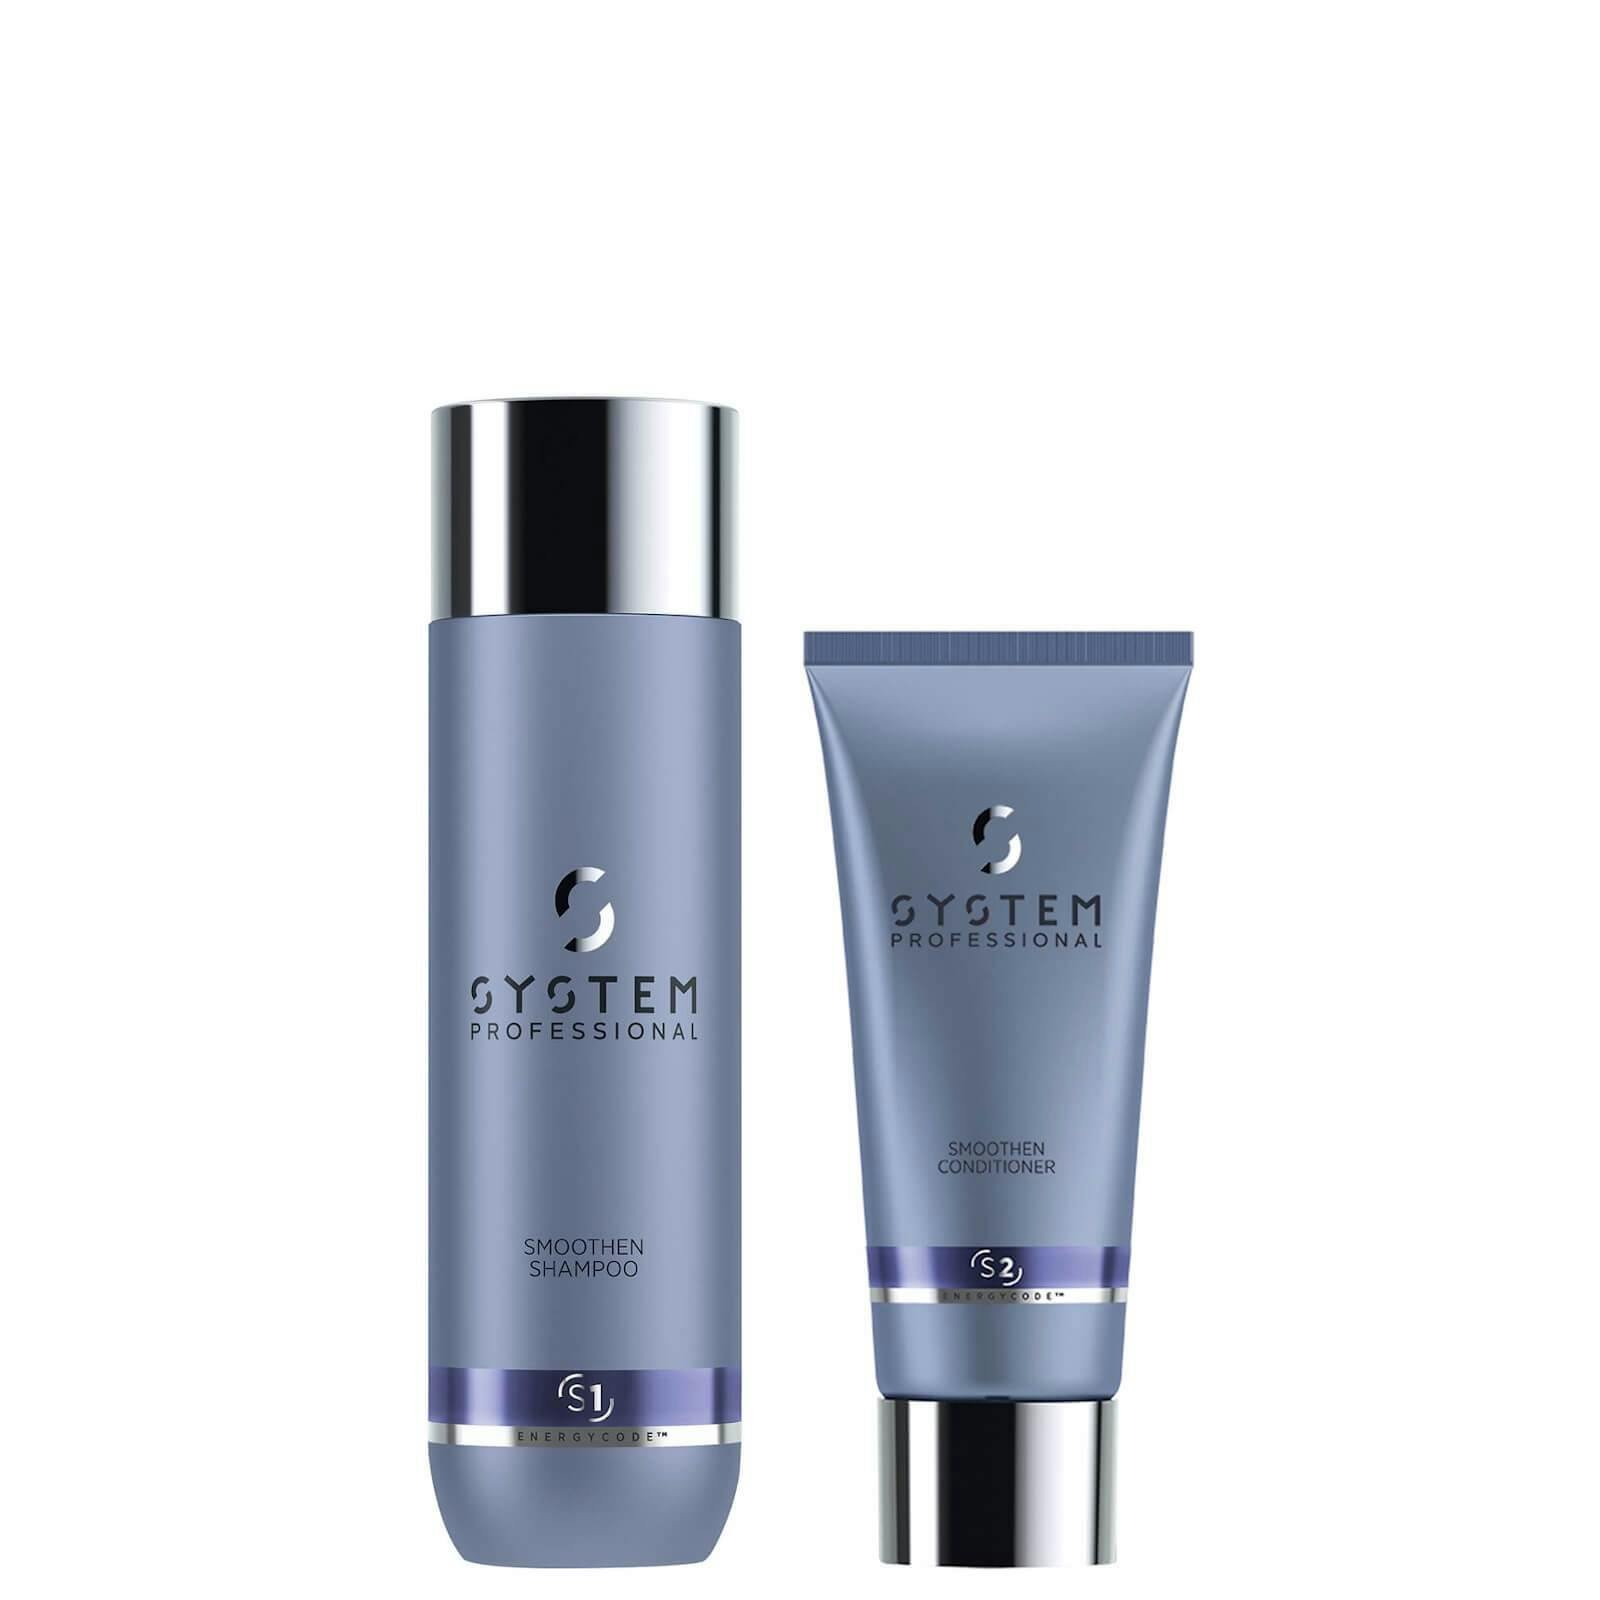 System Professional Smoothen Shampoo and Conditioner Bundle